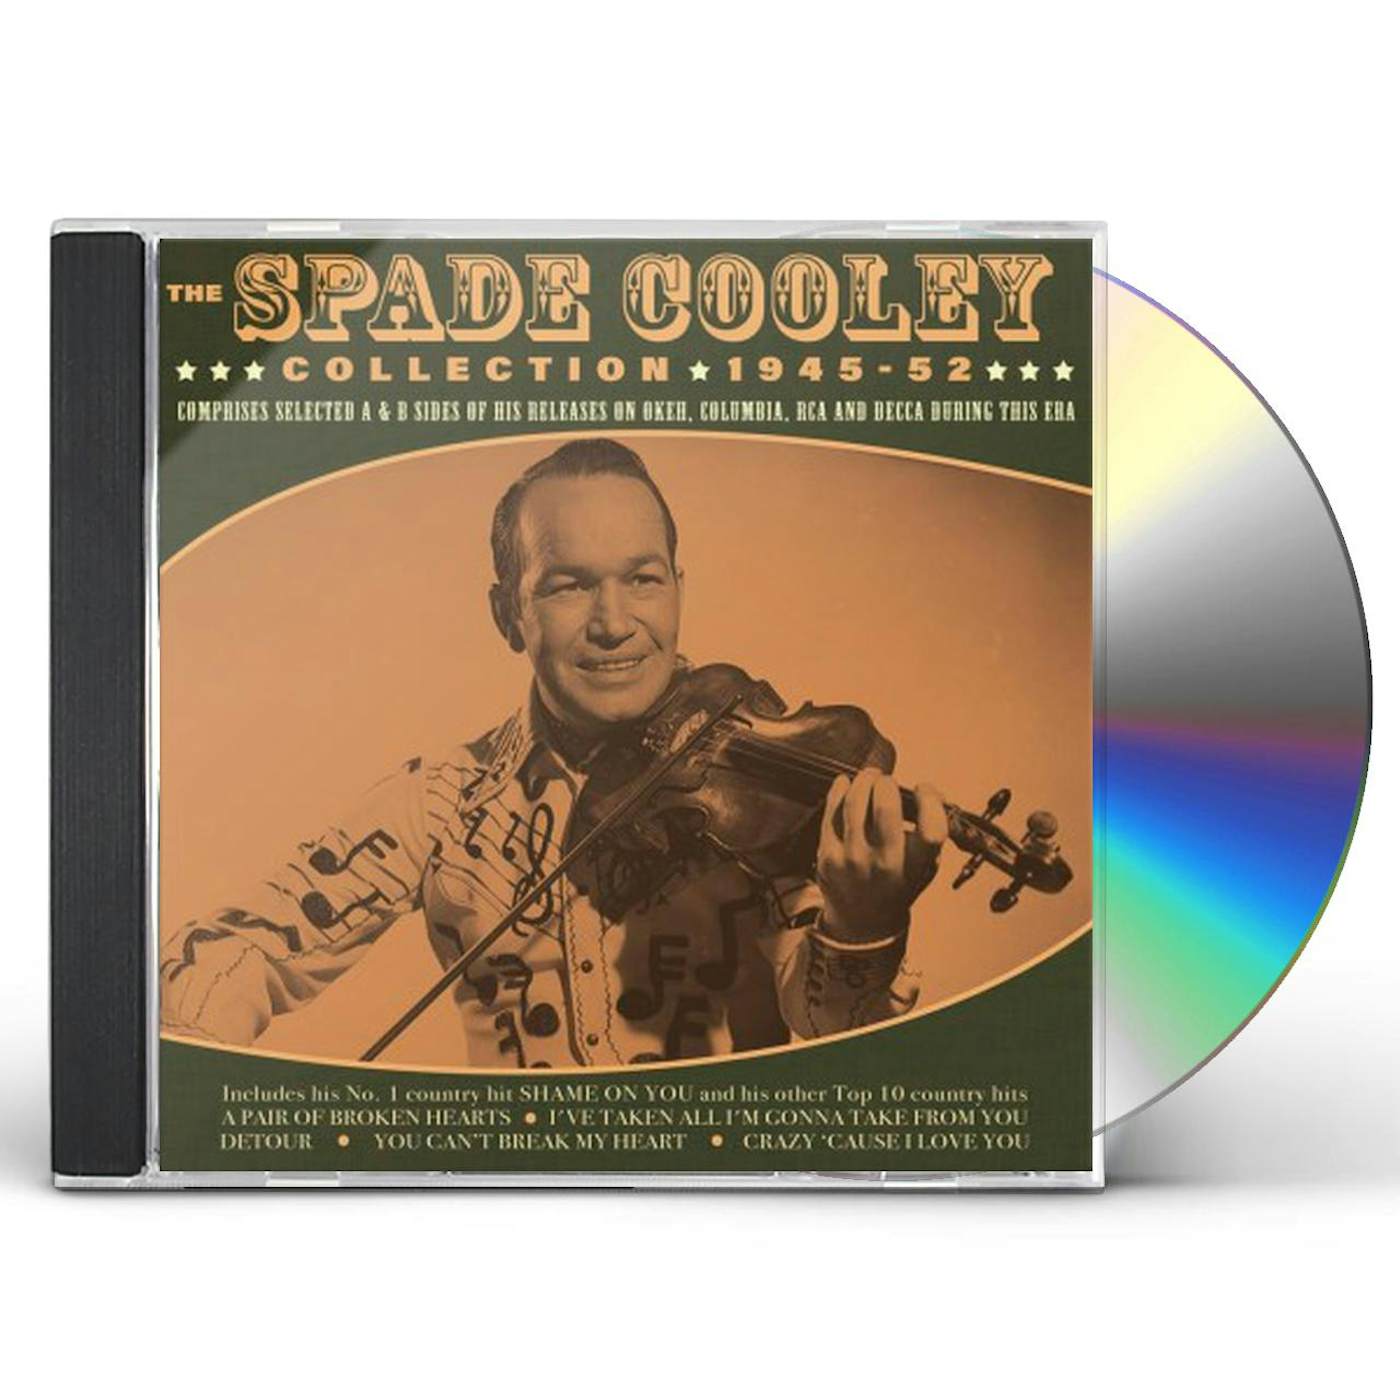 SPADE COOLEY COLLECTION 1945-52 CD